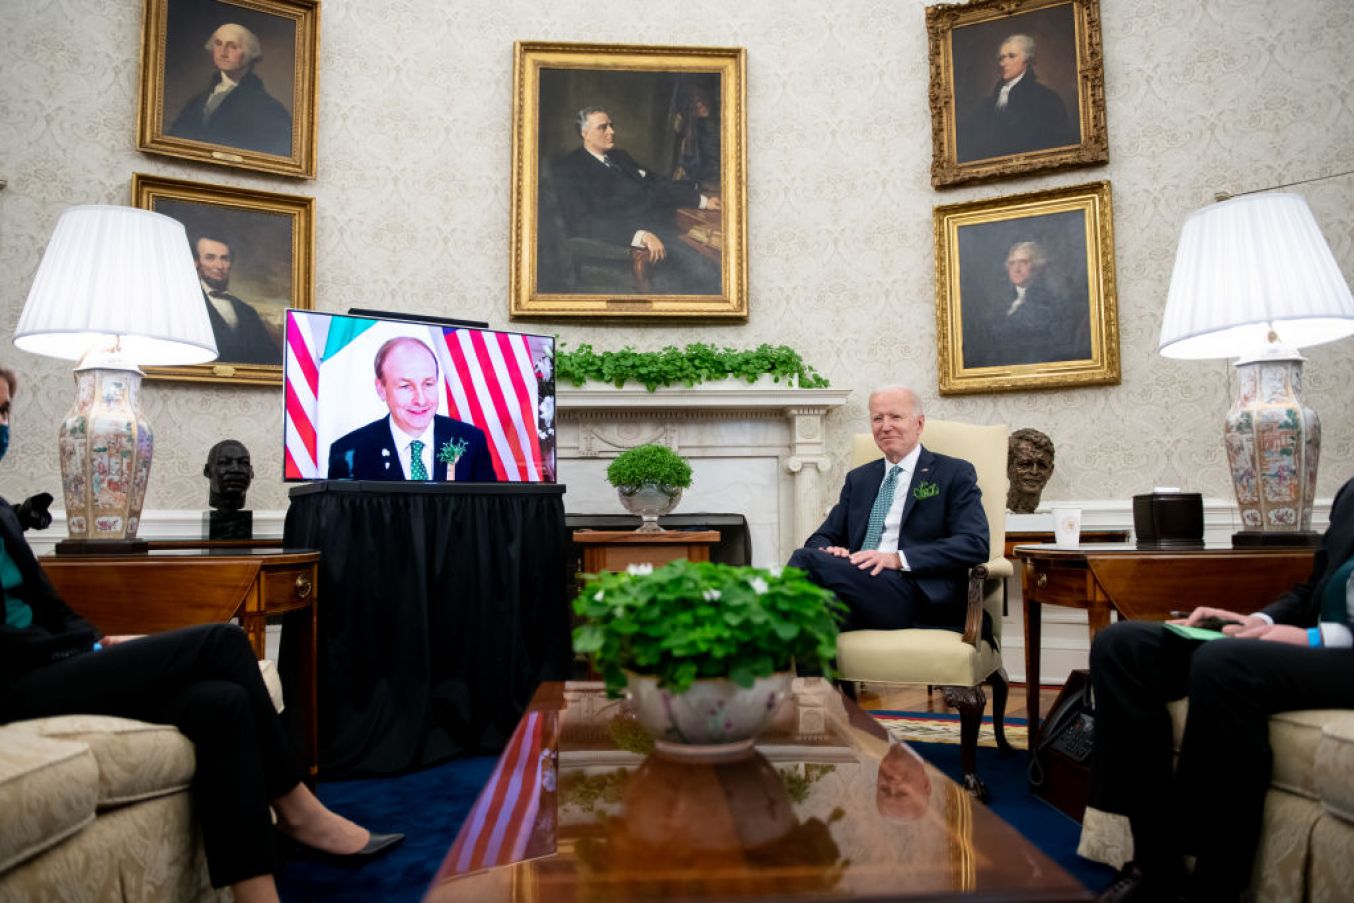 Us President Joe Biden During A Virtual Meeting With Taoiseach Micheál Martin In The Oval Office Of The White House On St Patrick's Day. Two Of Biden's Great-Great-Grandparents Emigrated From Ireland. Photo: Erin Scott-Pool/Getty